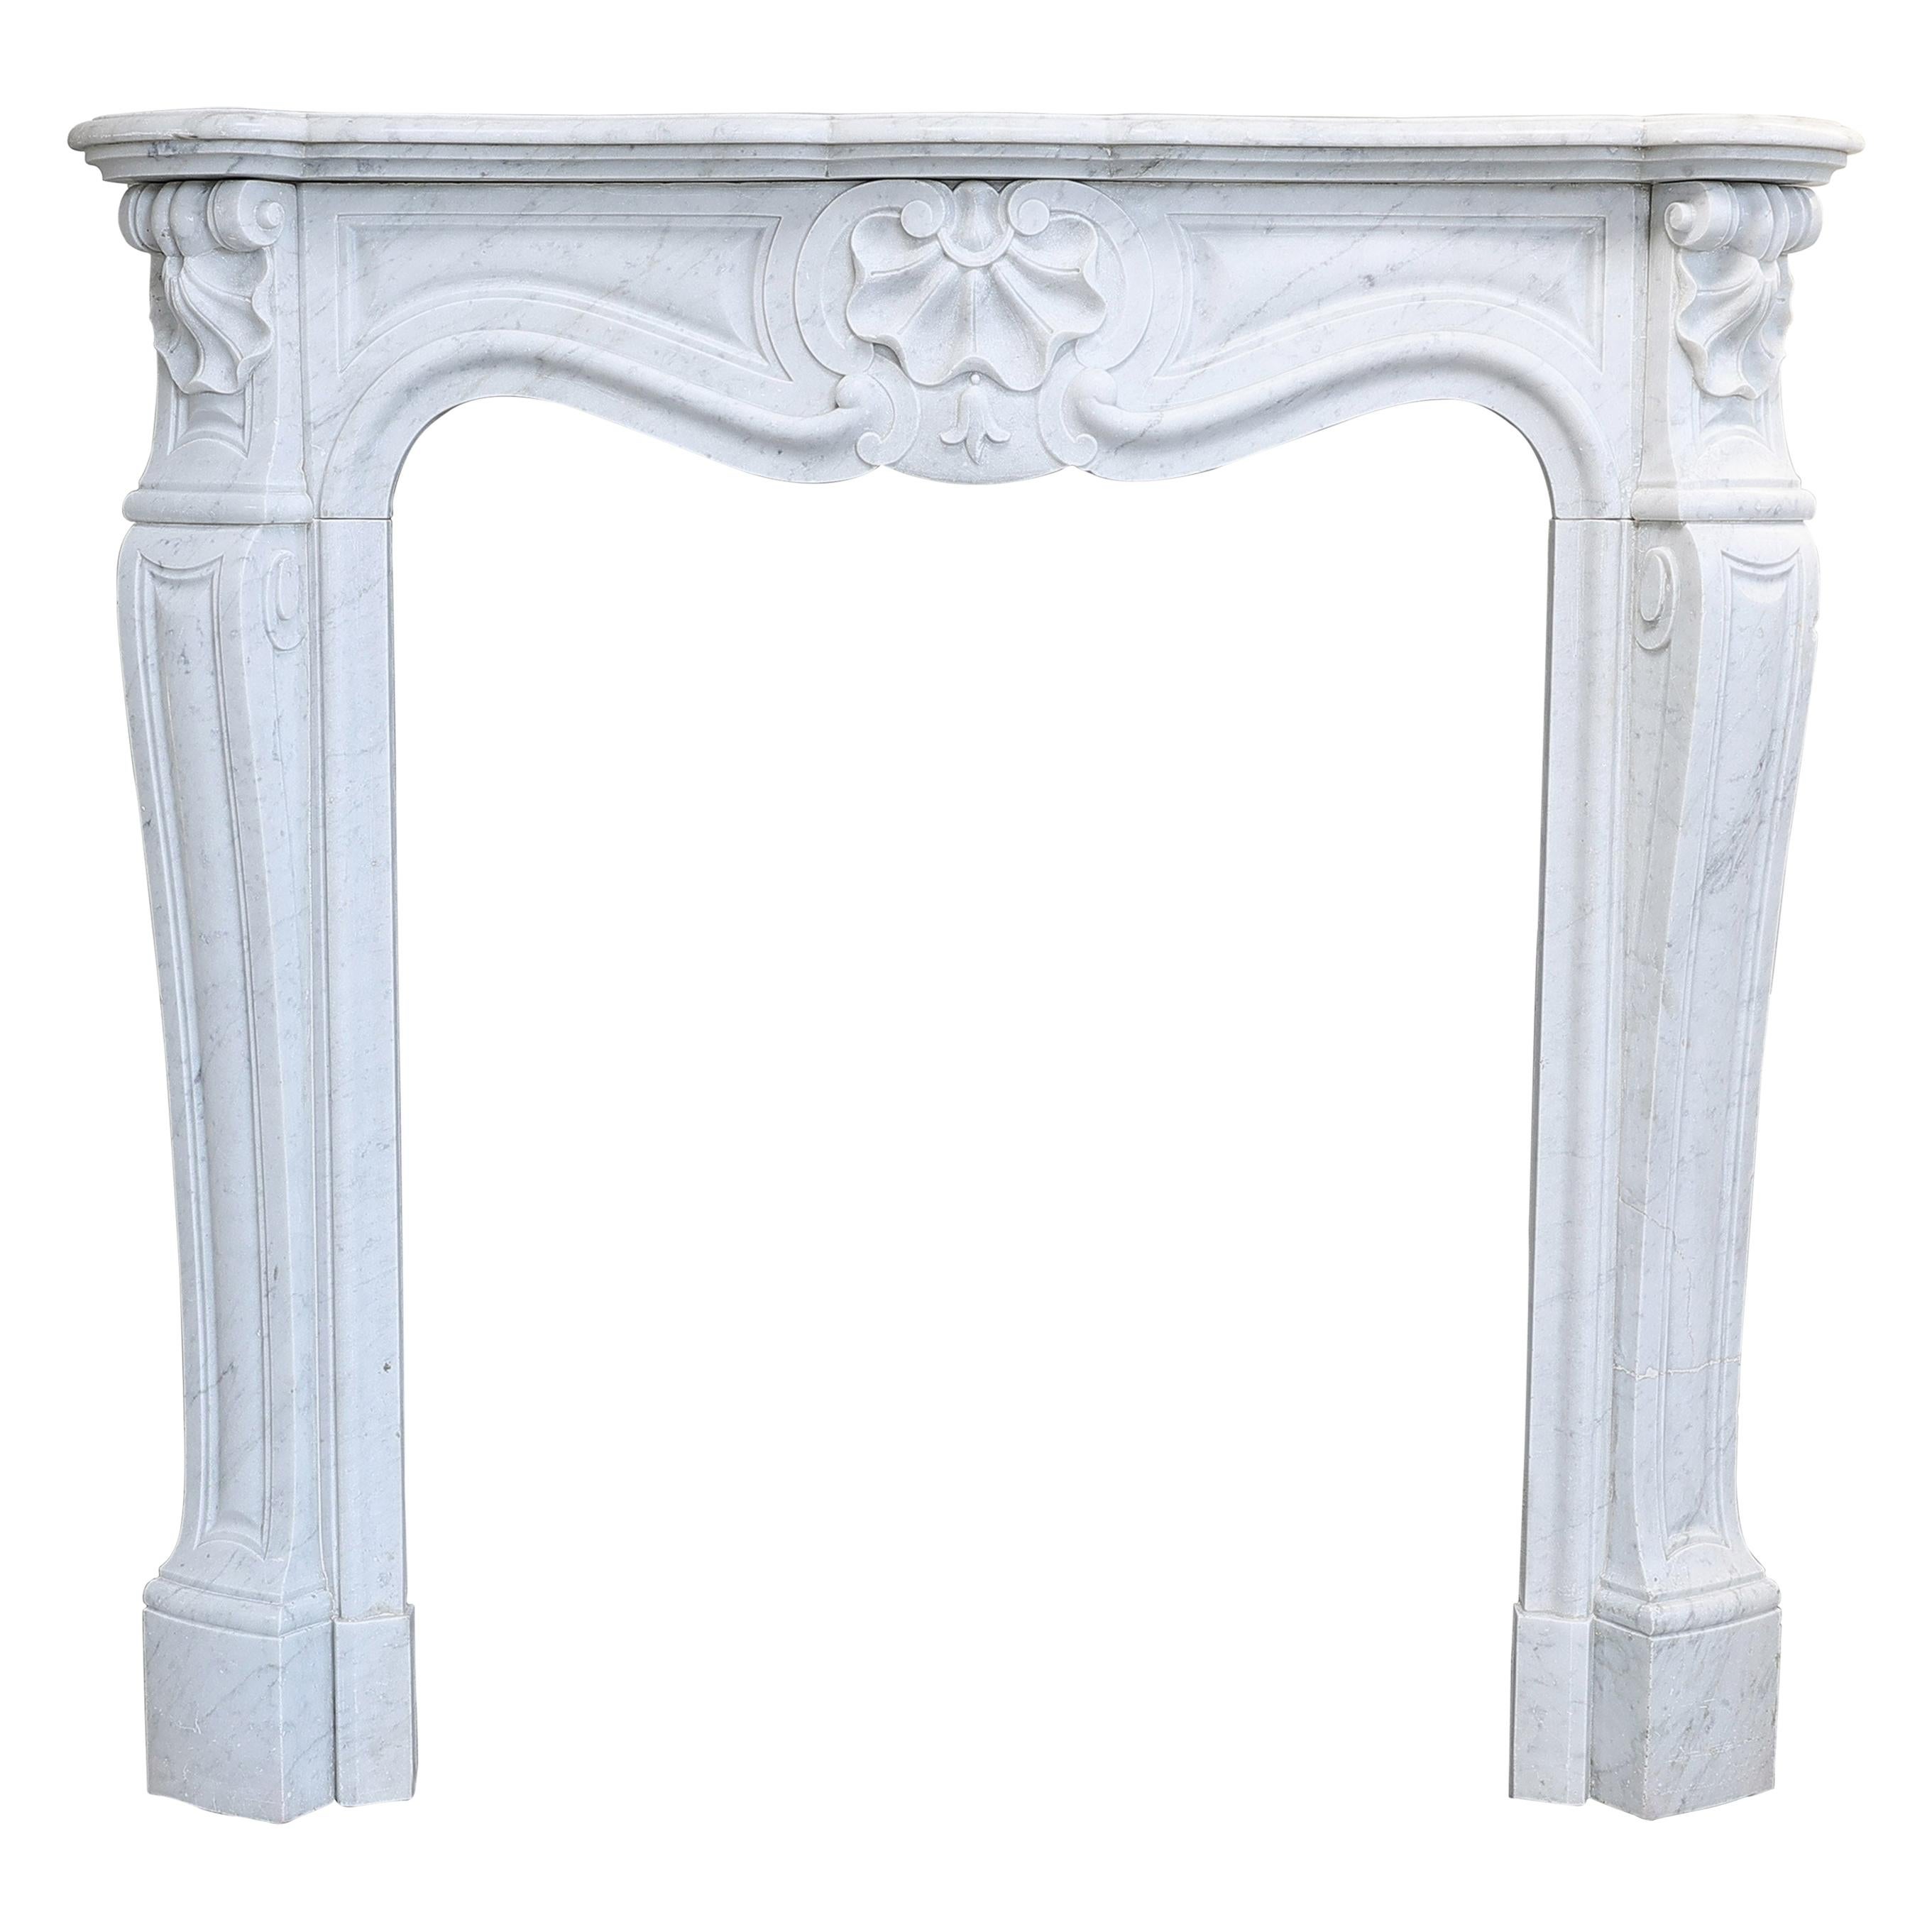 19th Century Mantel Piece in Style of Louis XV of Carrara Marble